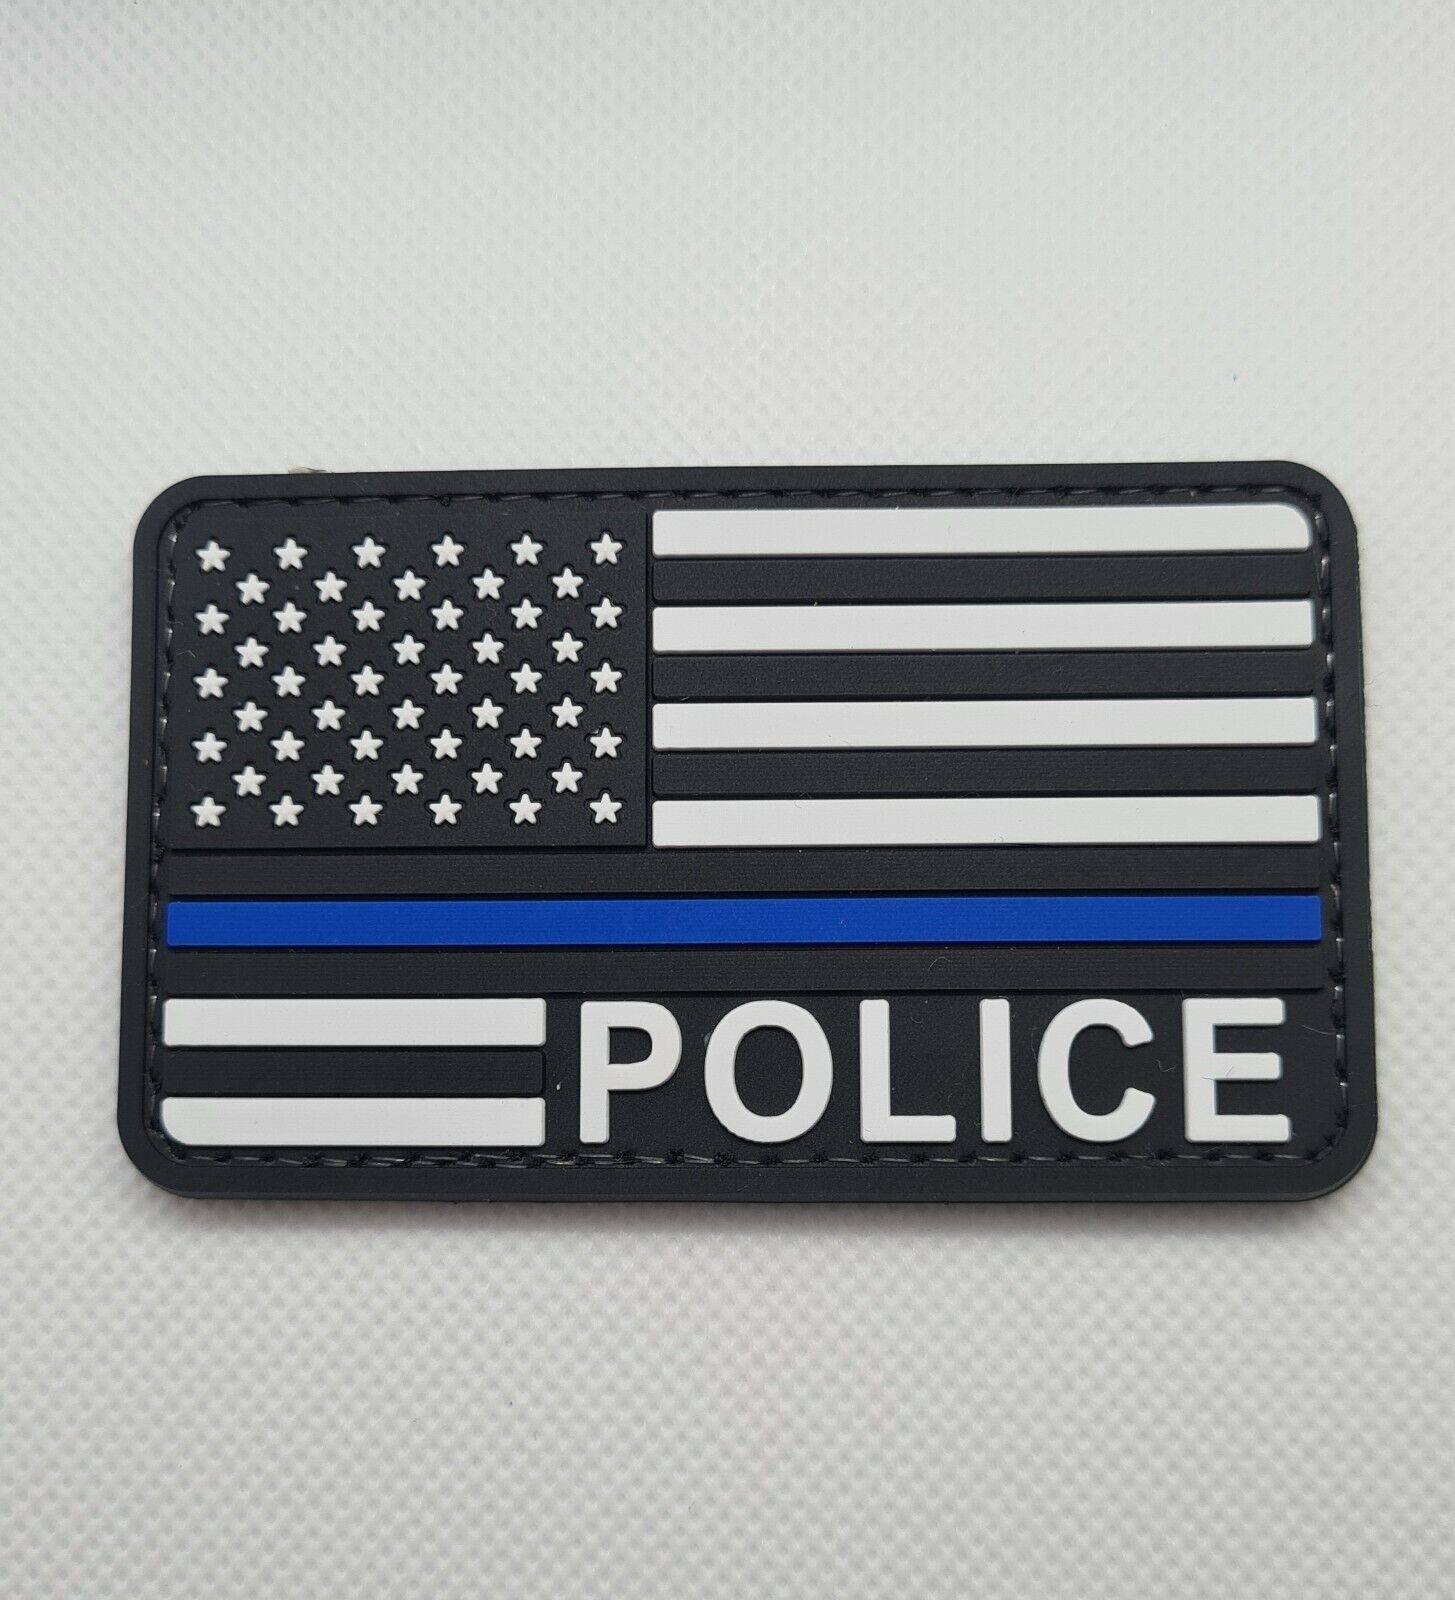 USA Police Flag 3D PVC Tactical Morale Patch – Hook Backed